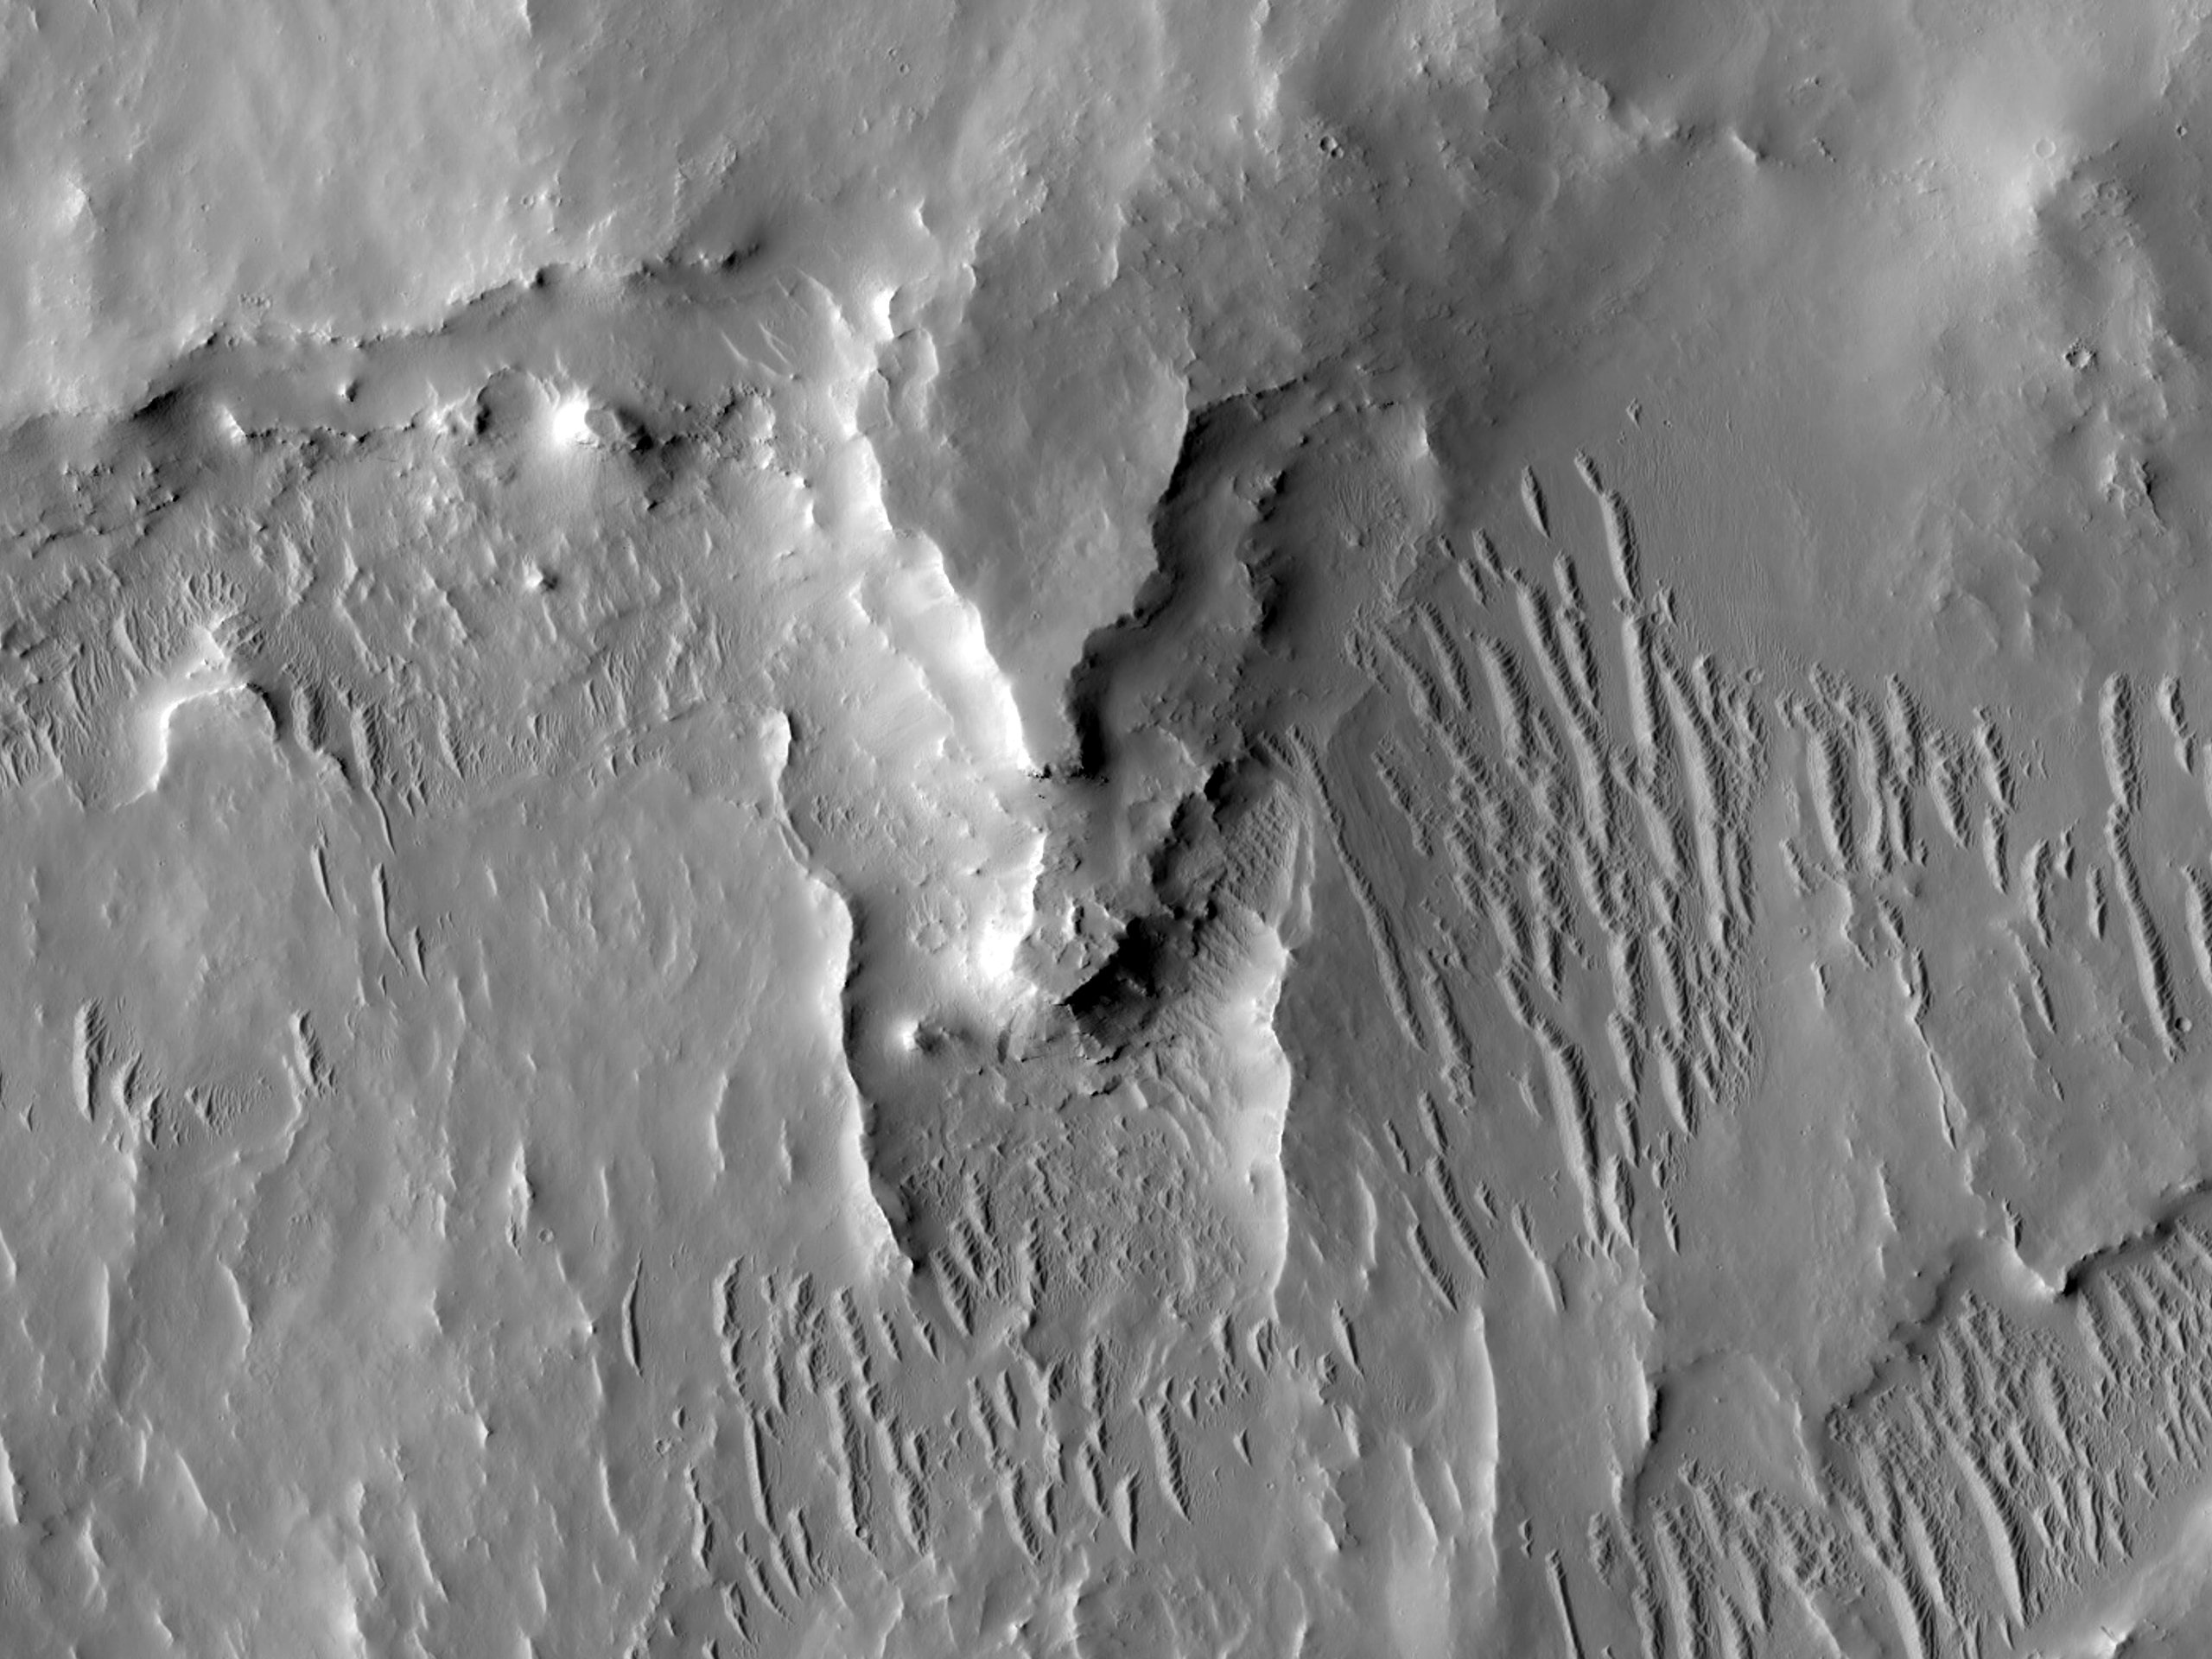 Layers in Eastern Tikhonravov Crater